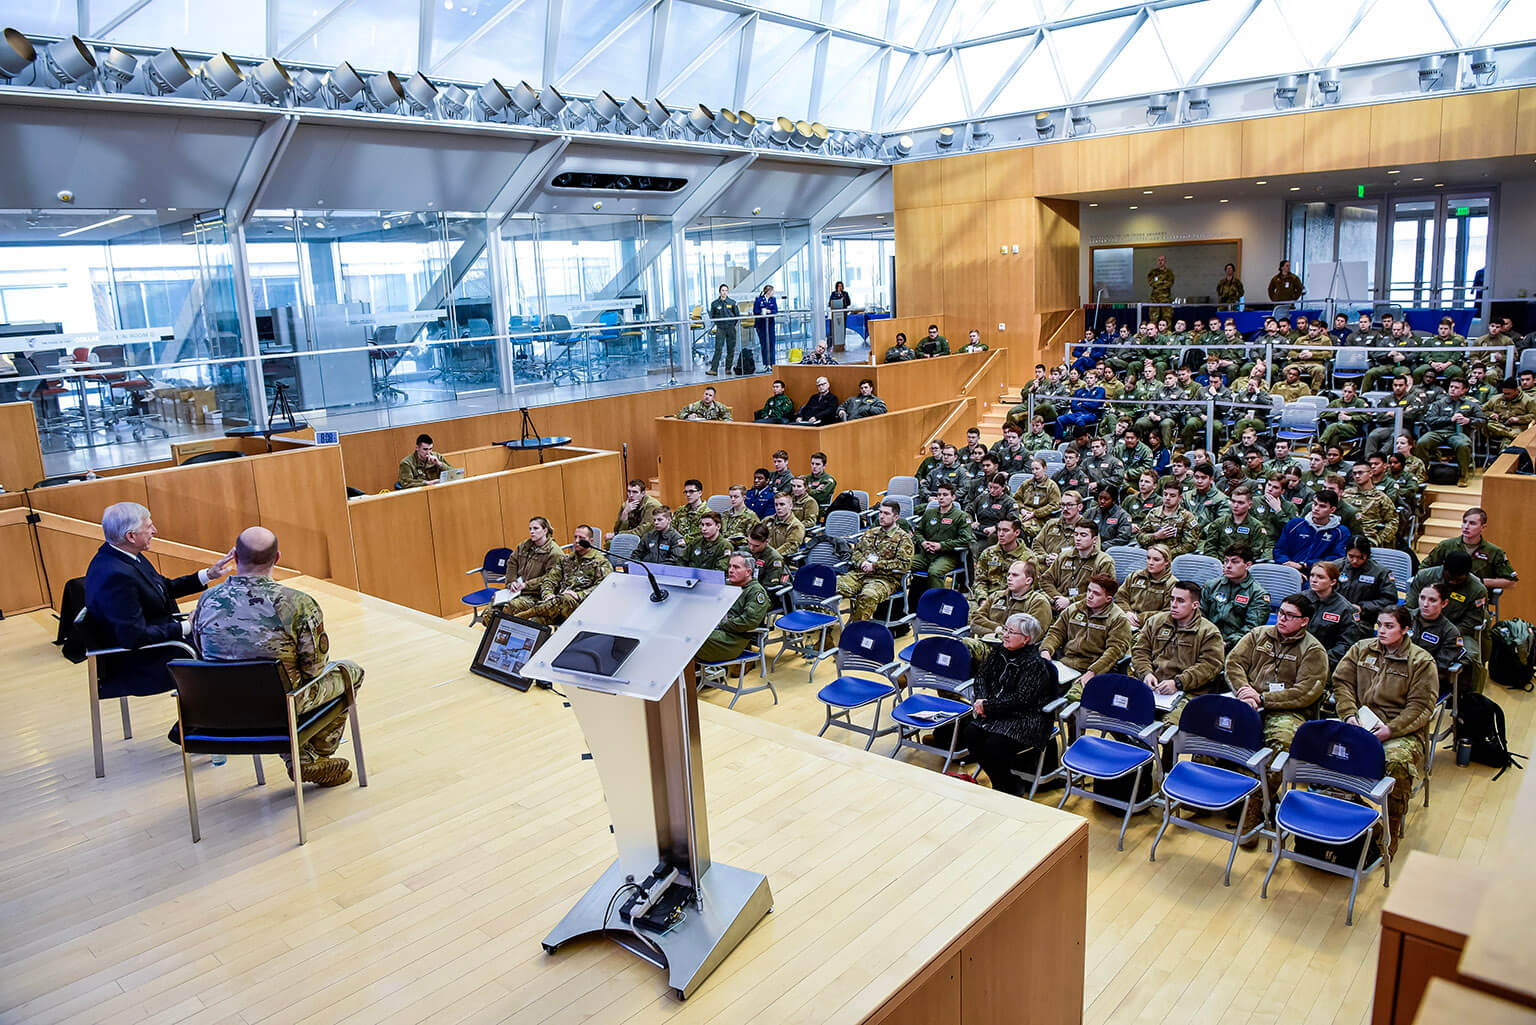 Cadets participate in the inaugural Strategy and Warfare Center Symposium in Polaris Hall 